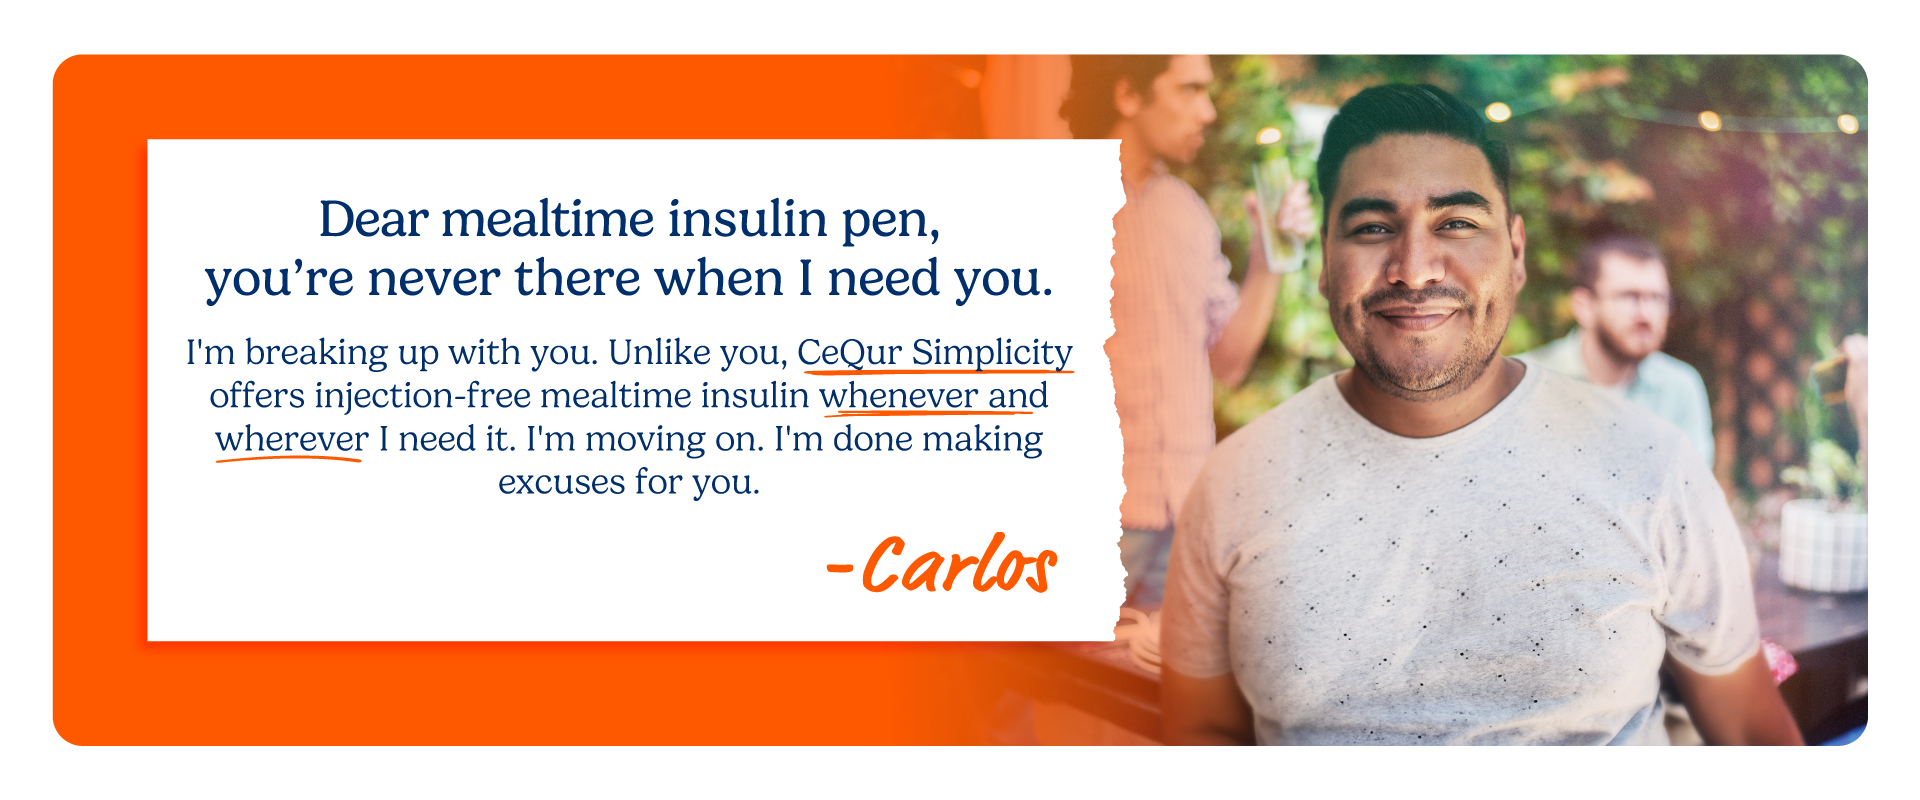 CeQur Simplicity patient answering FAQs on why he stopped using an insulin pen